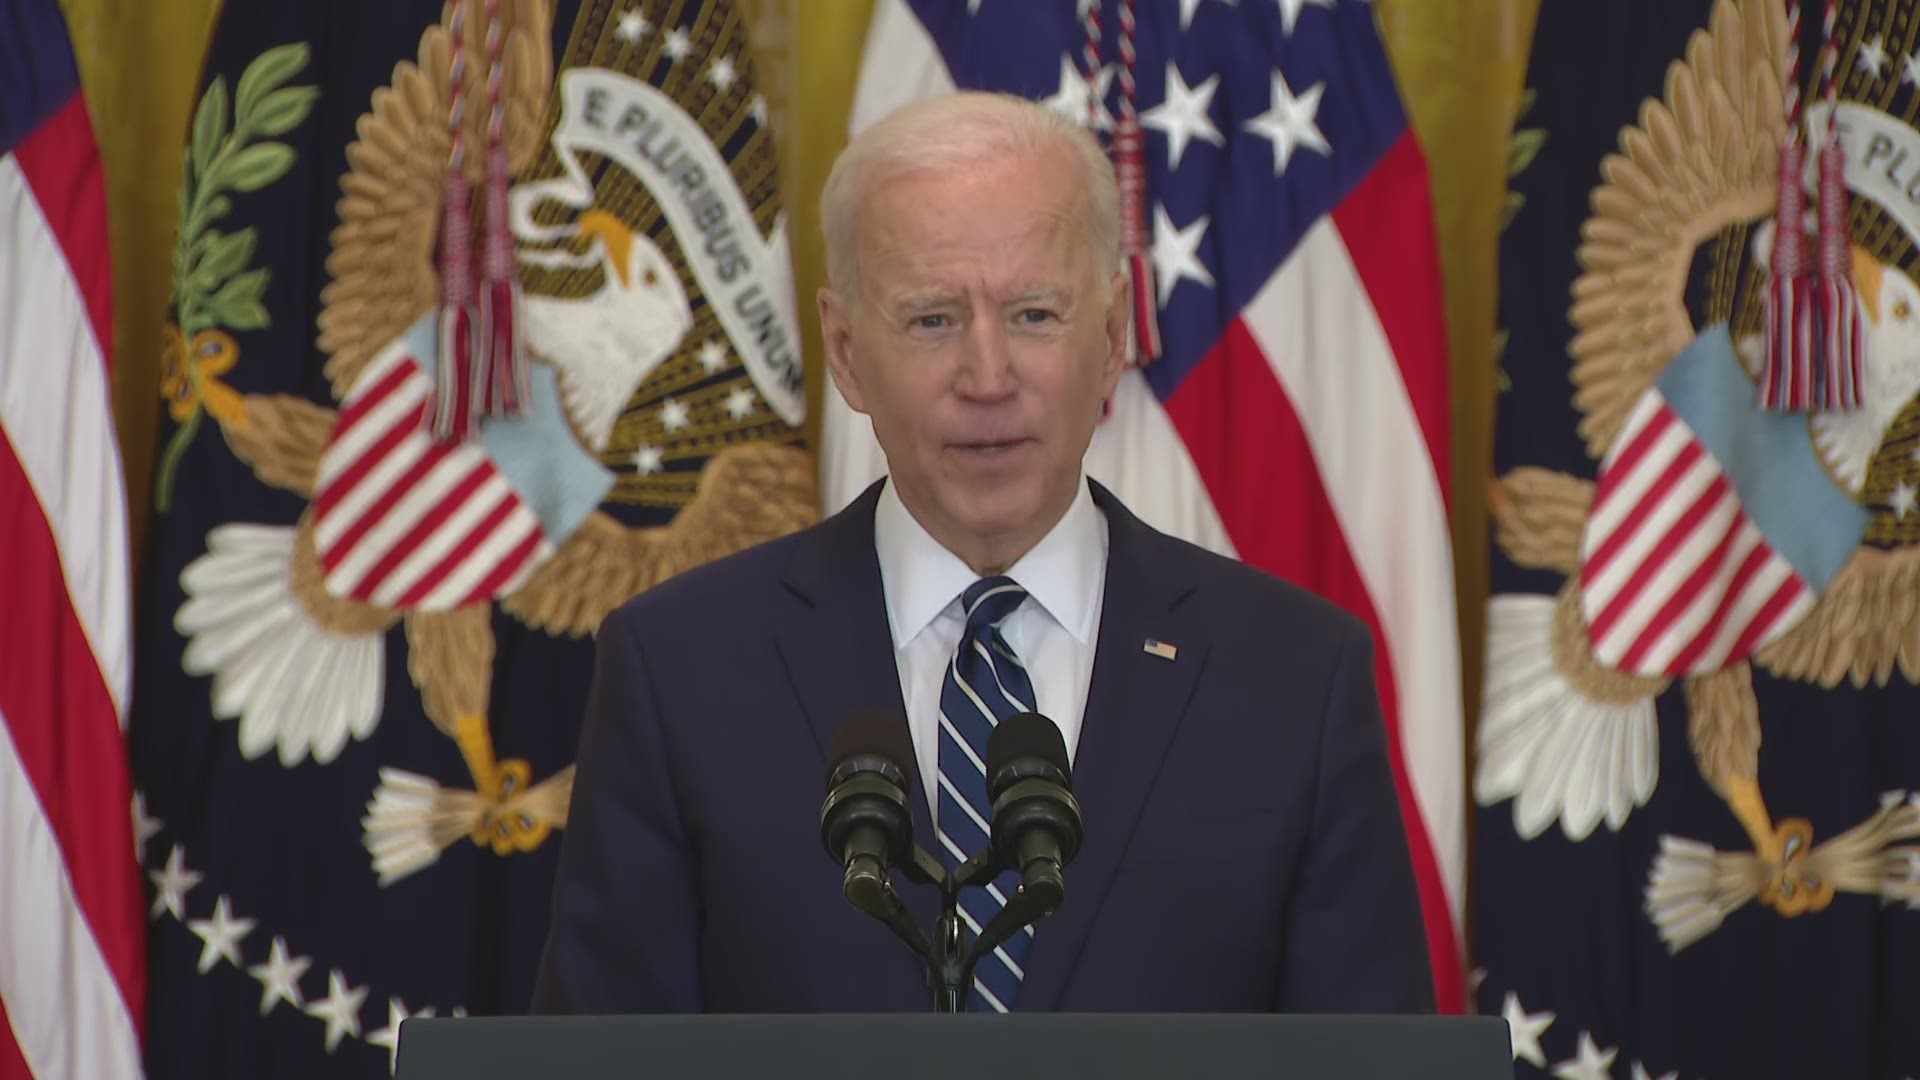 President Joe Biden pledged 200 million coronavirus vaccine doses in his first 100 days Thursday. Also discusses reopening schools and stimulus payments.